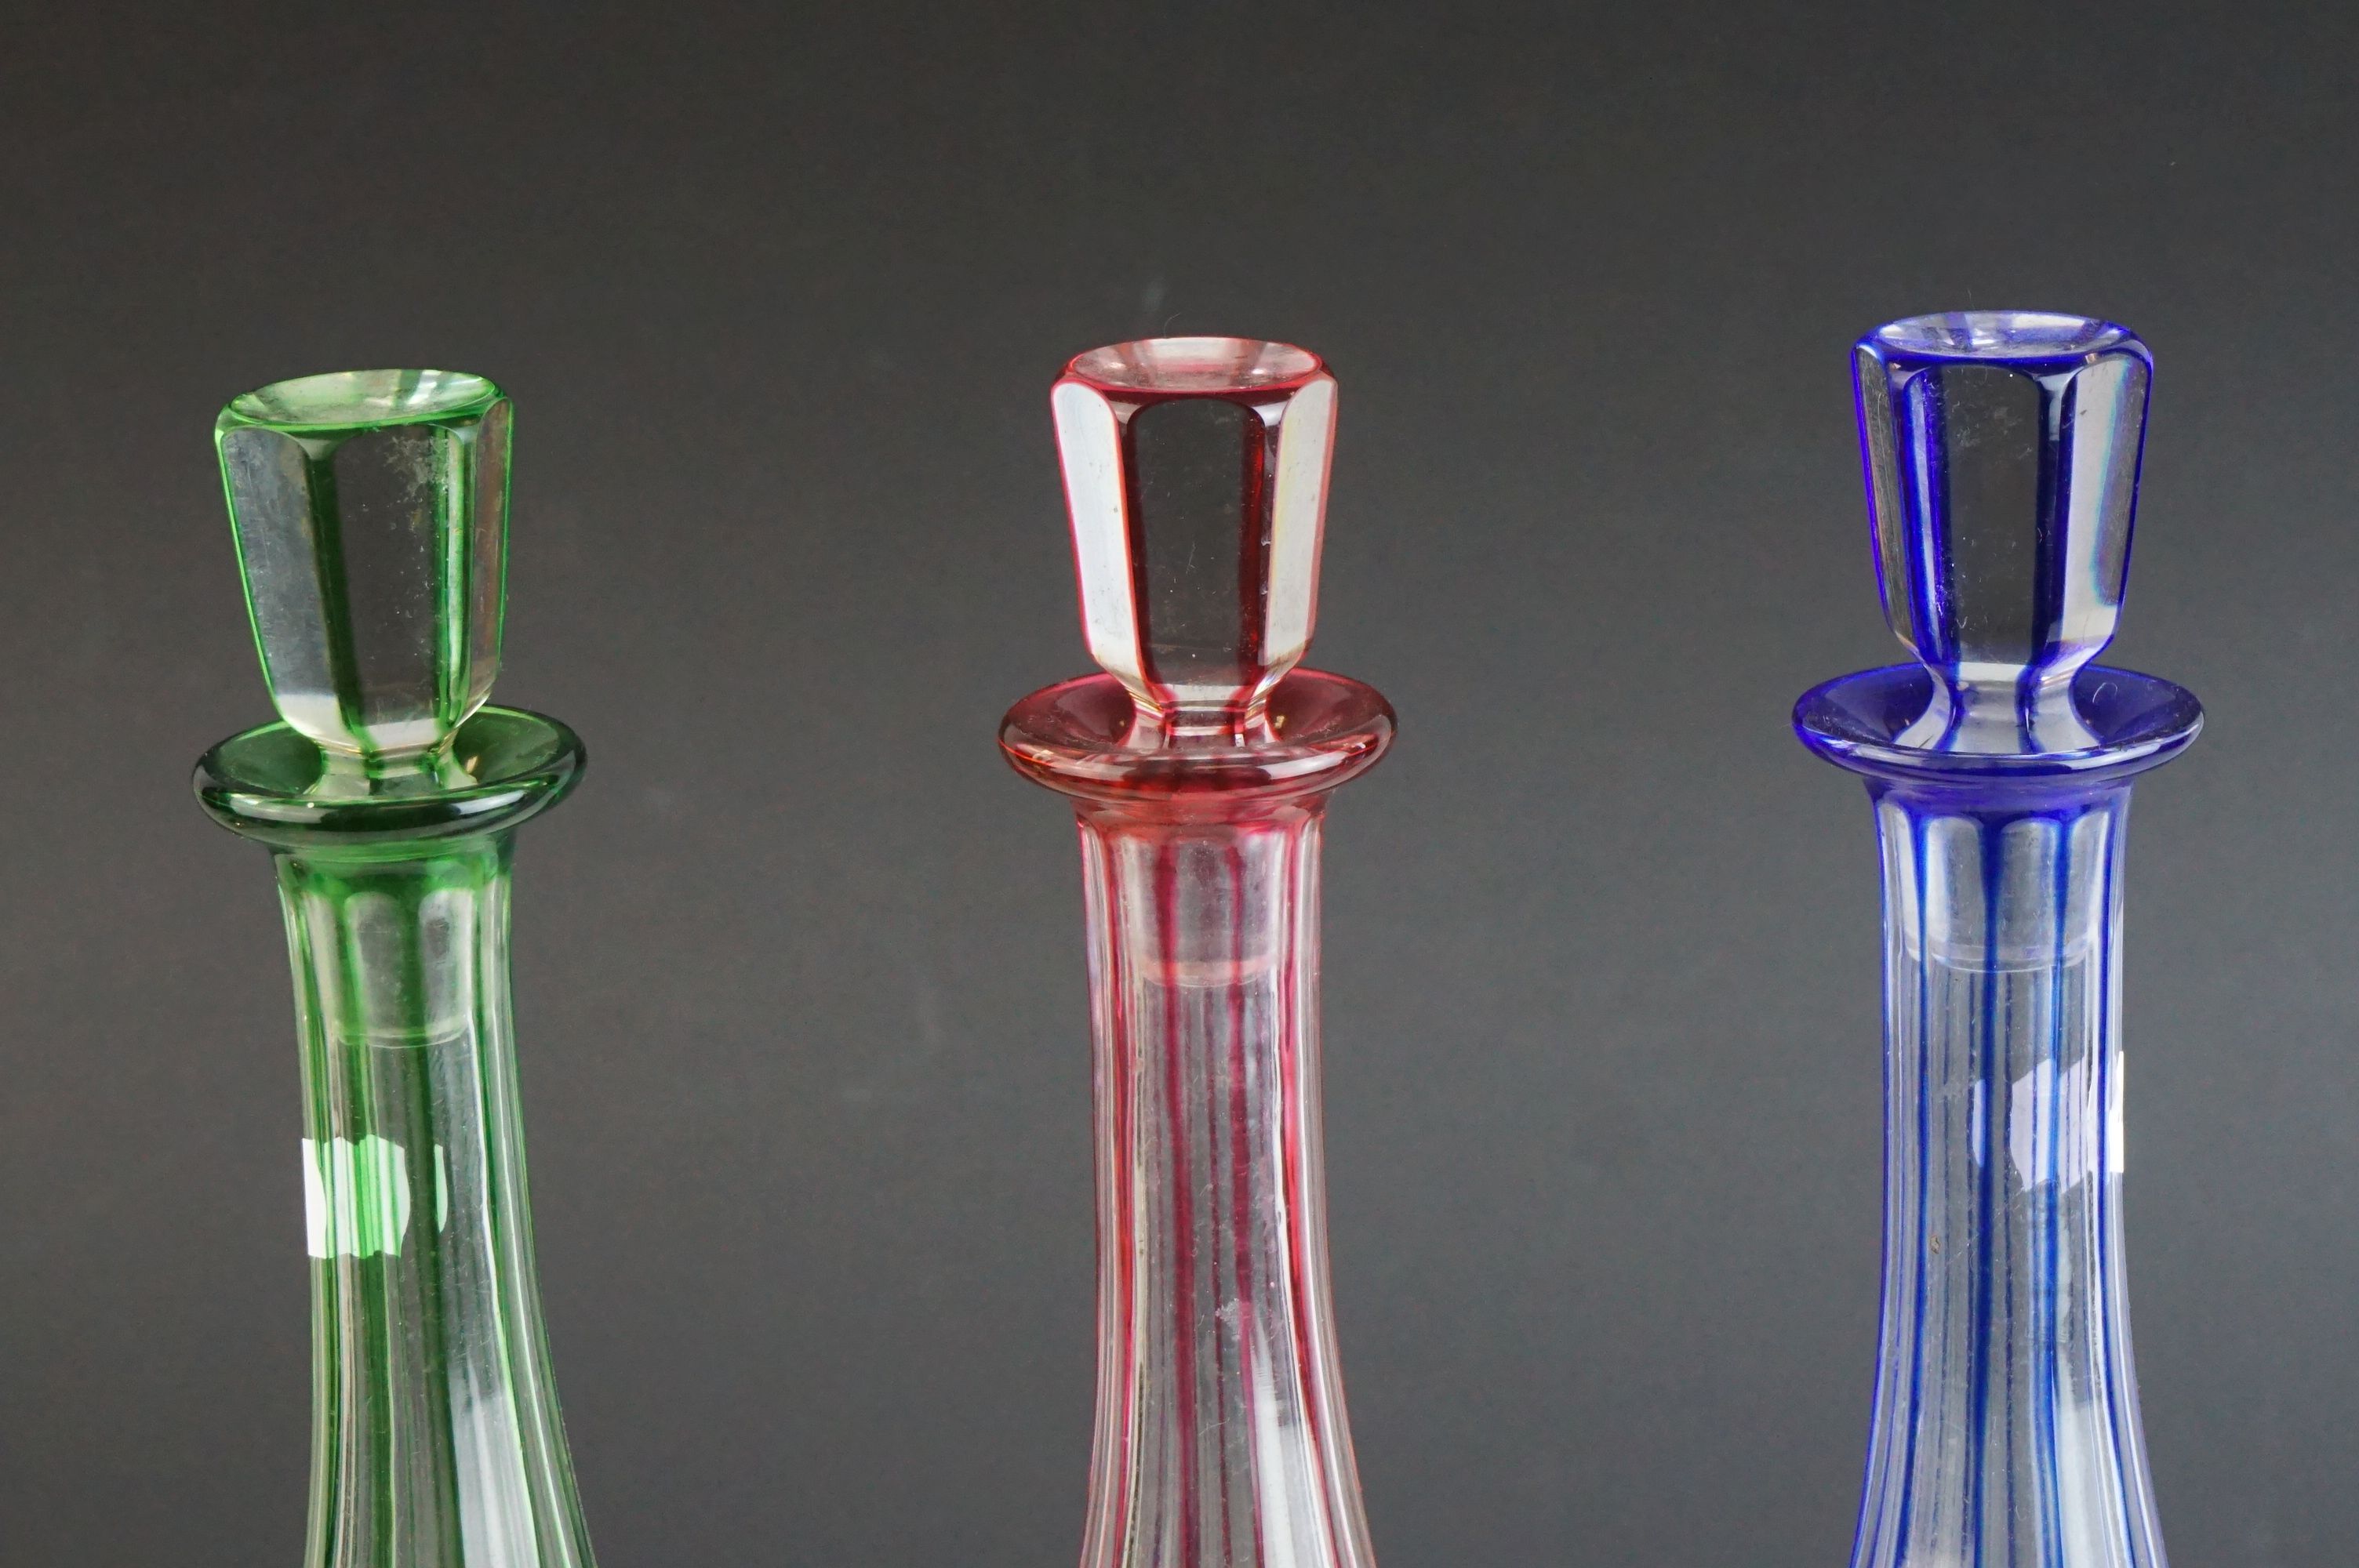 Set of Three Bohemian Coloured Glass Tall Decanters with Stoppers (blue, green and red) held on a - Image 7 of 9